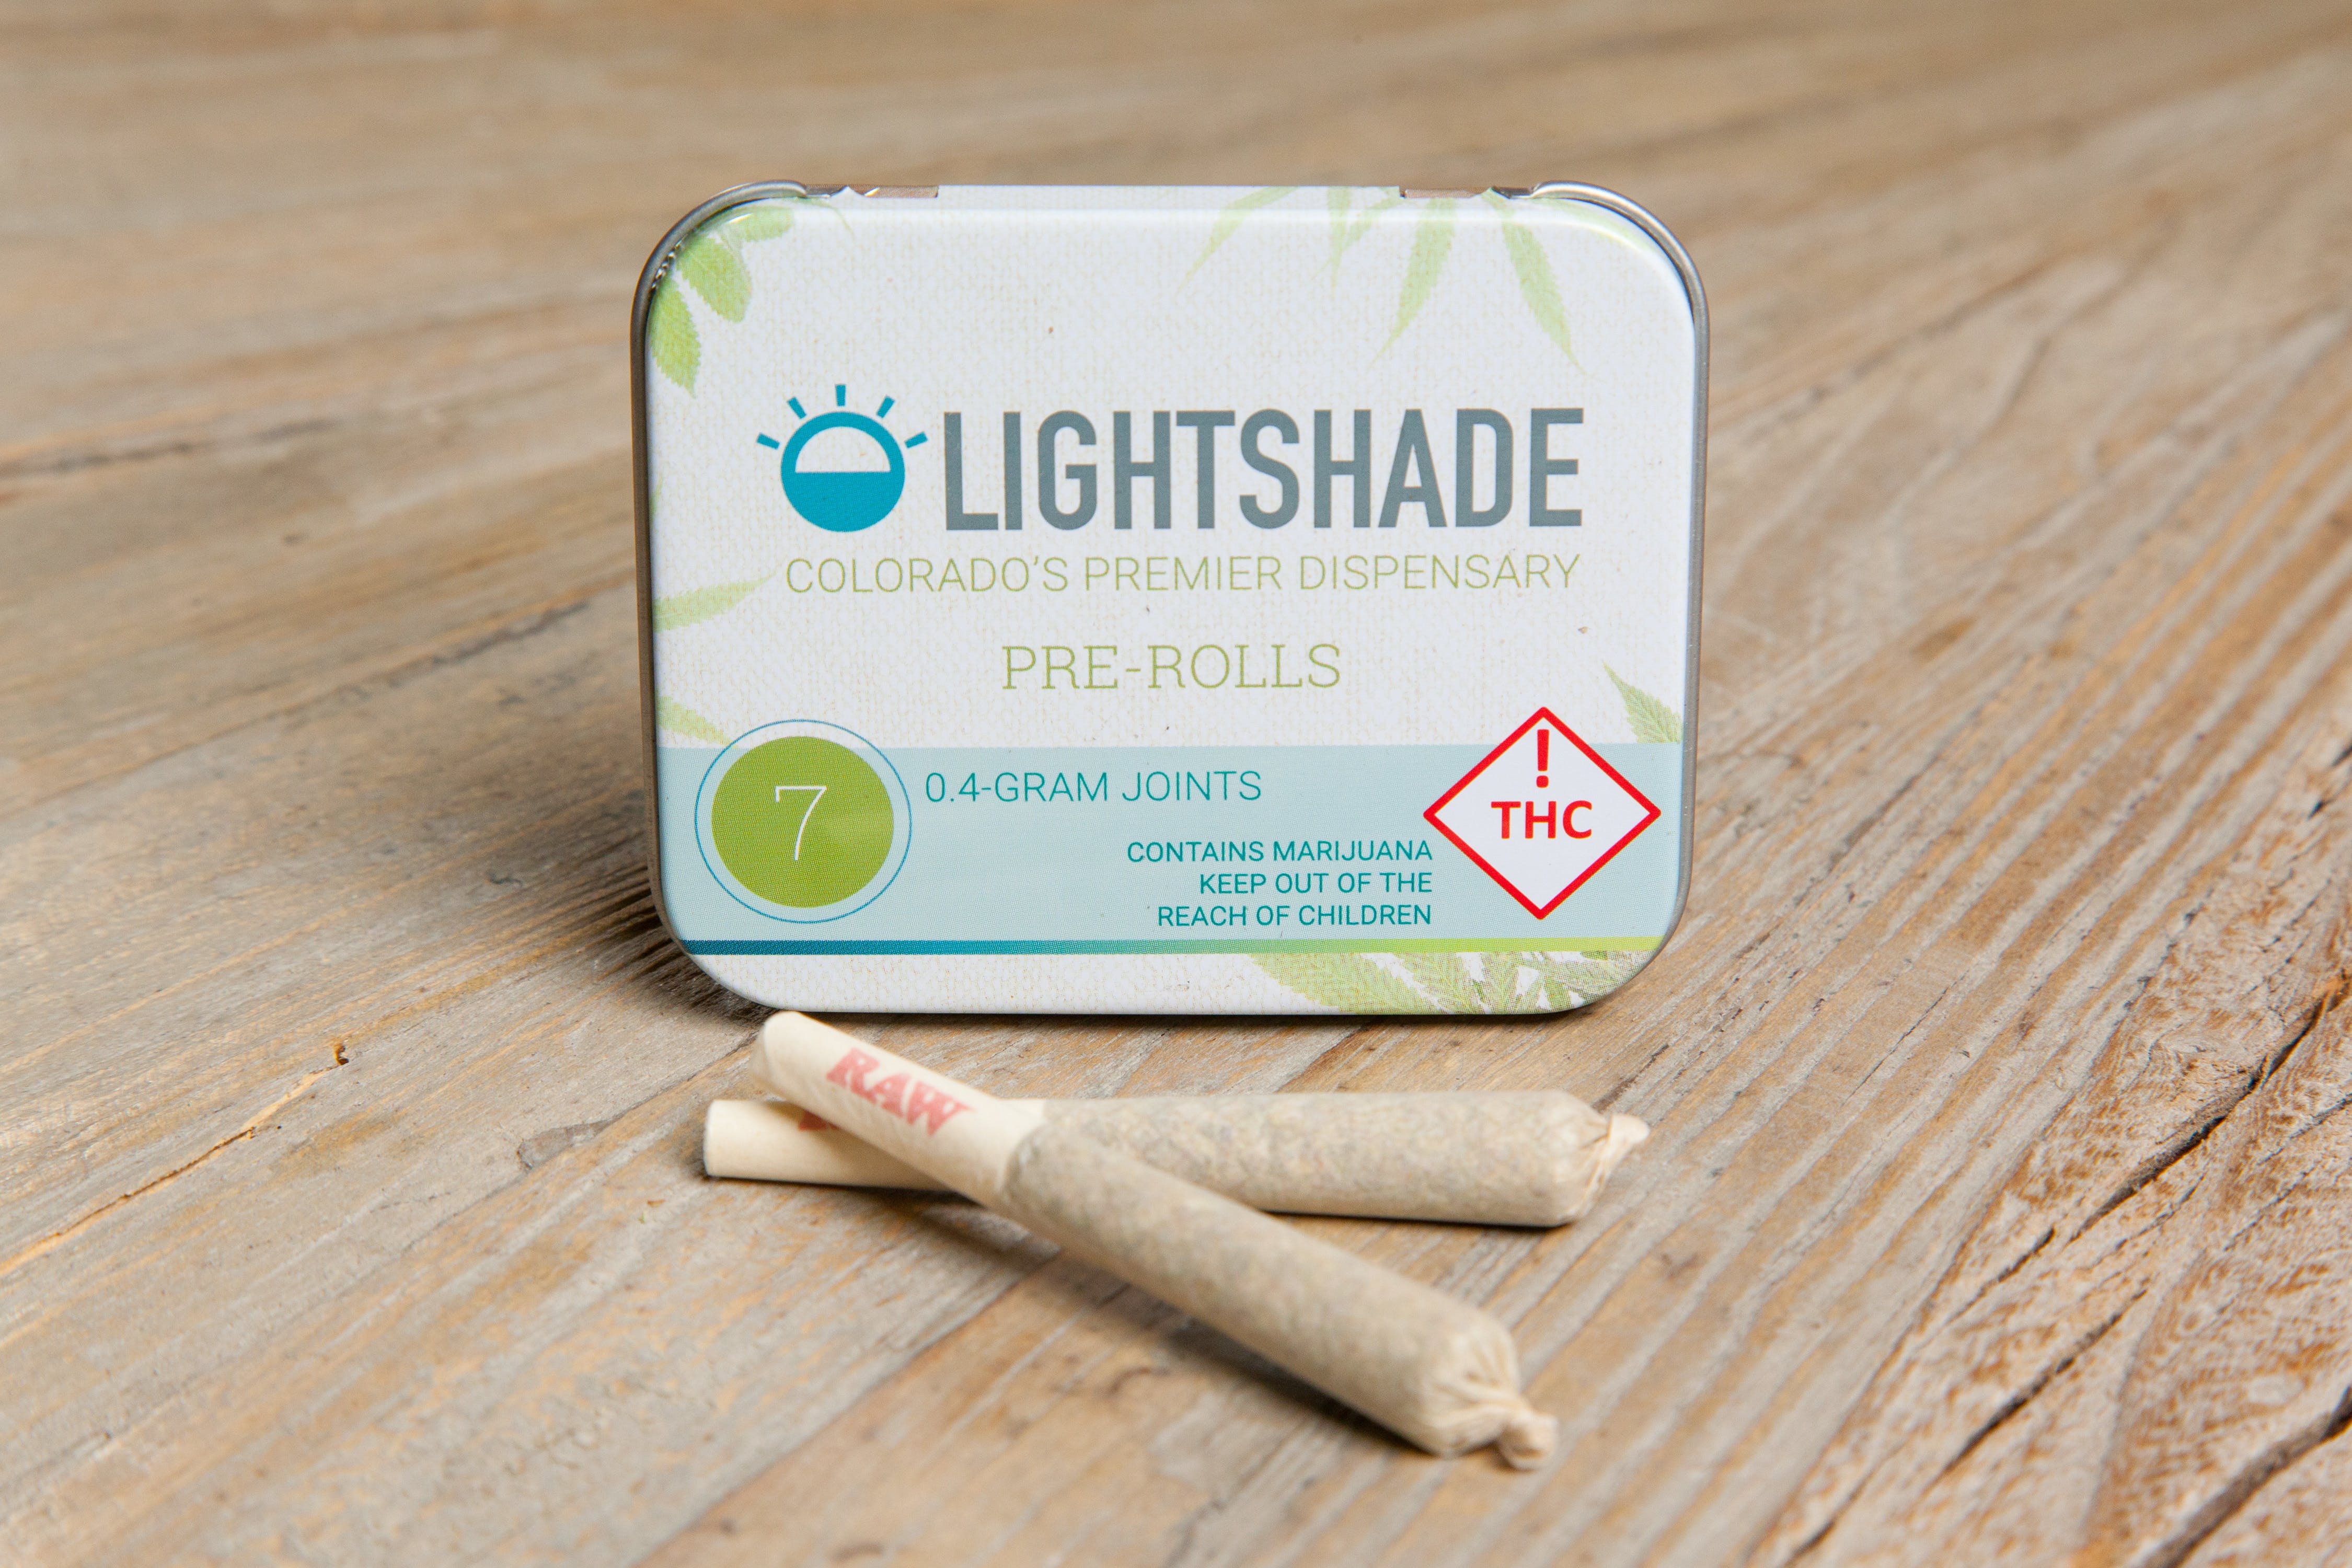 marijuana-dispensaries-lightshade-federal-heights-in-federal-heights-durban-poison-mini-joint-pack